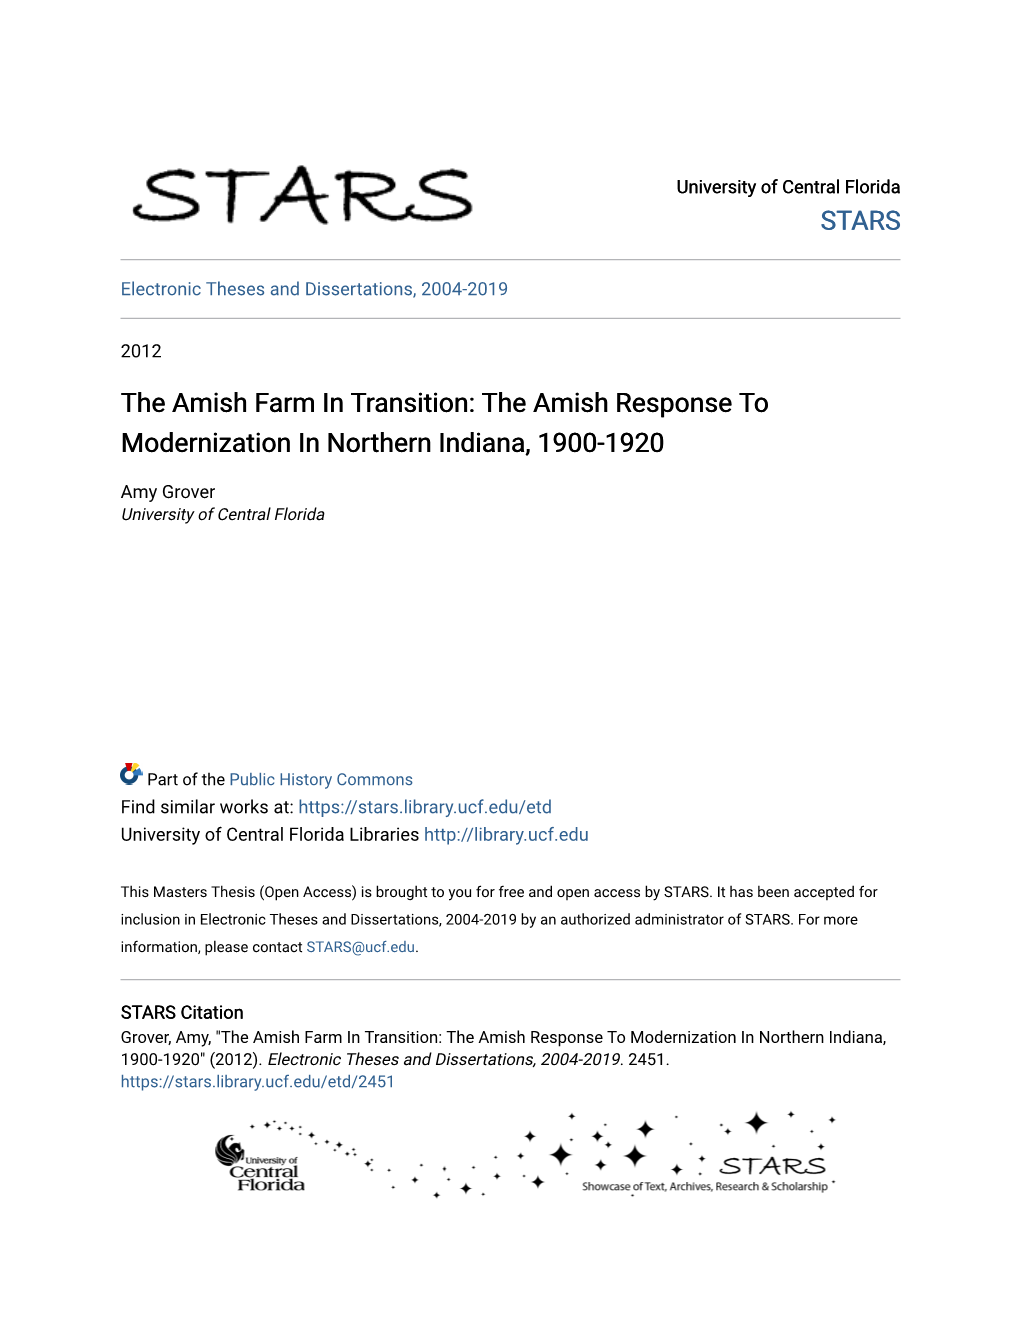 The Amish Farm in Transition: the Amish Response to Modernization in Northern Indiana, 1900-1920